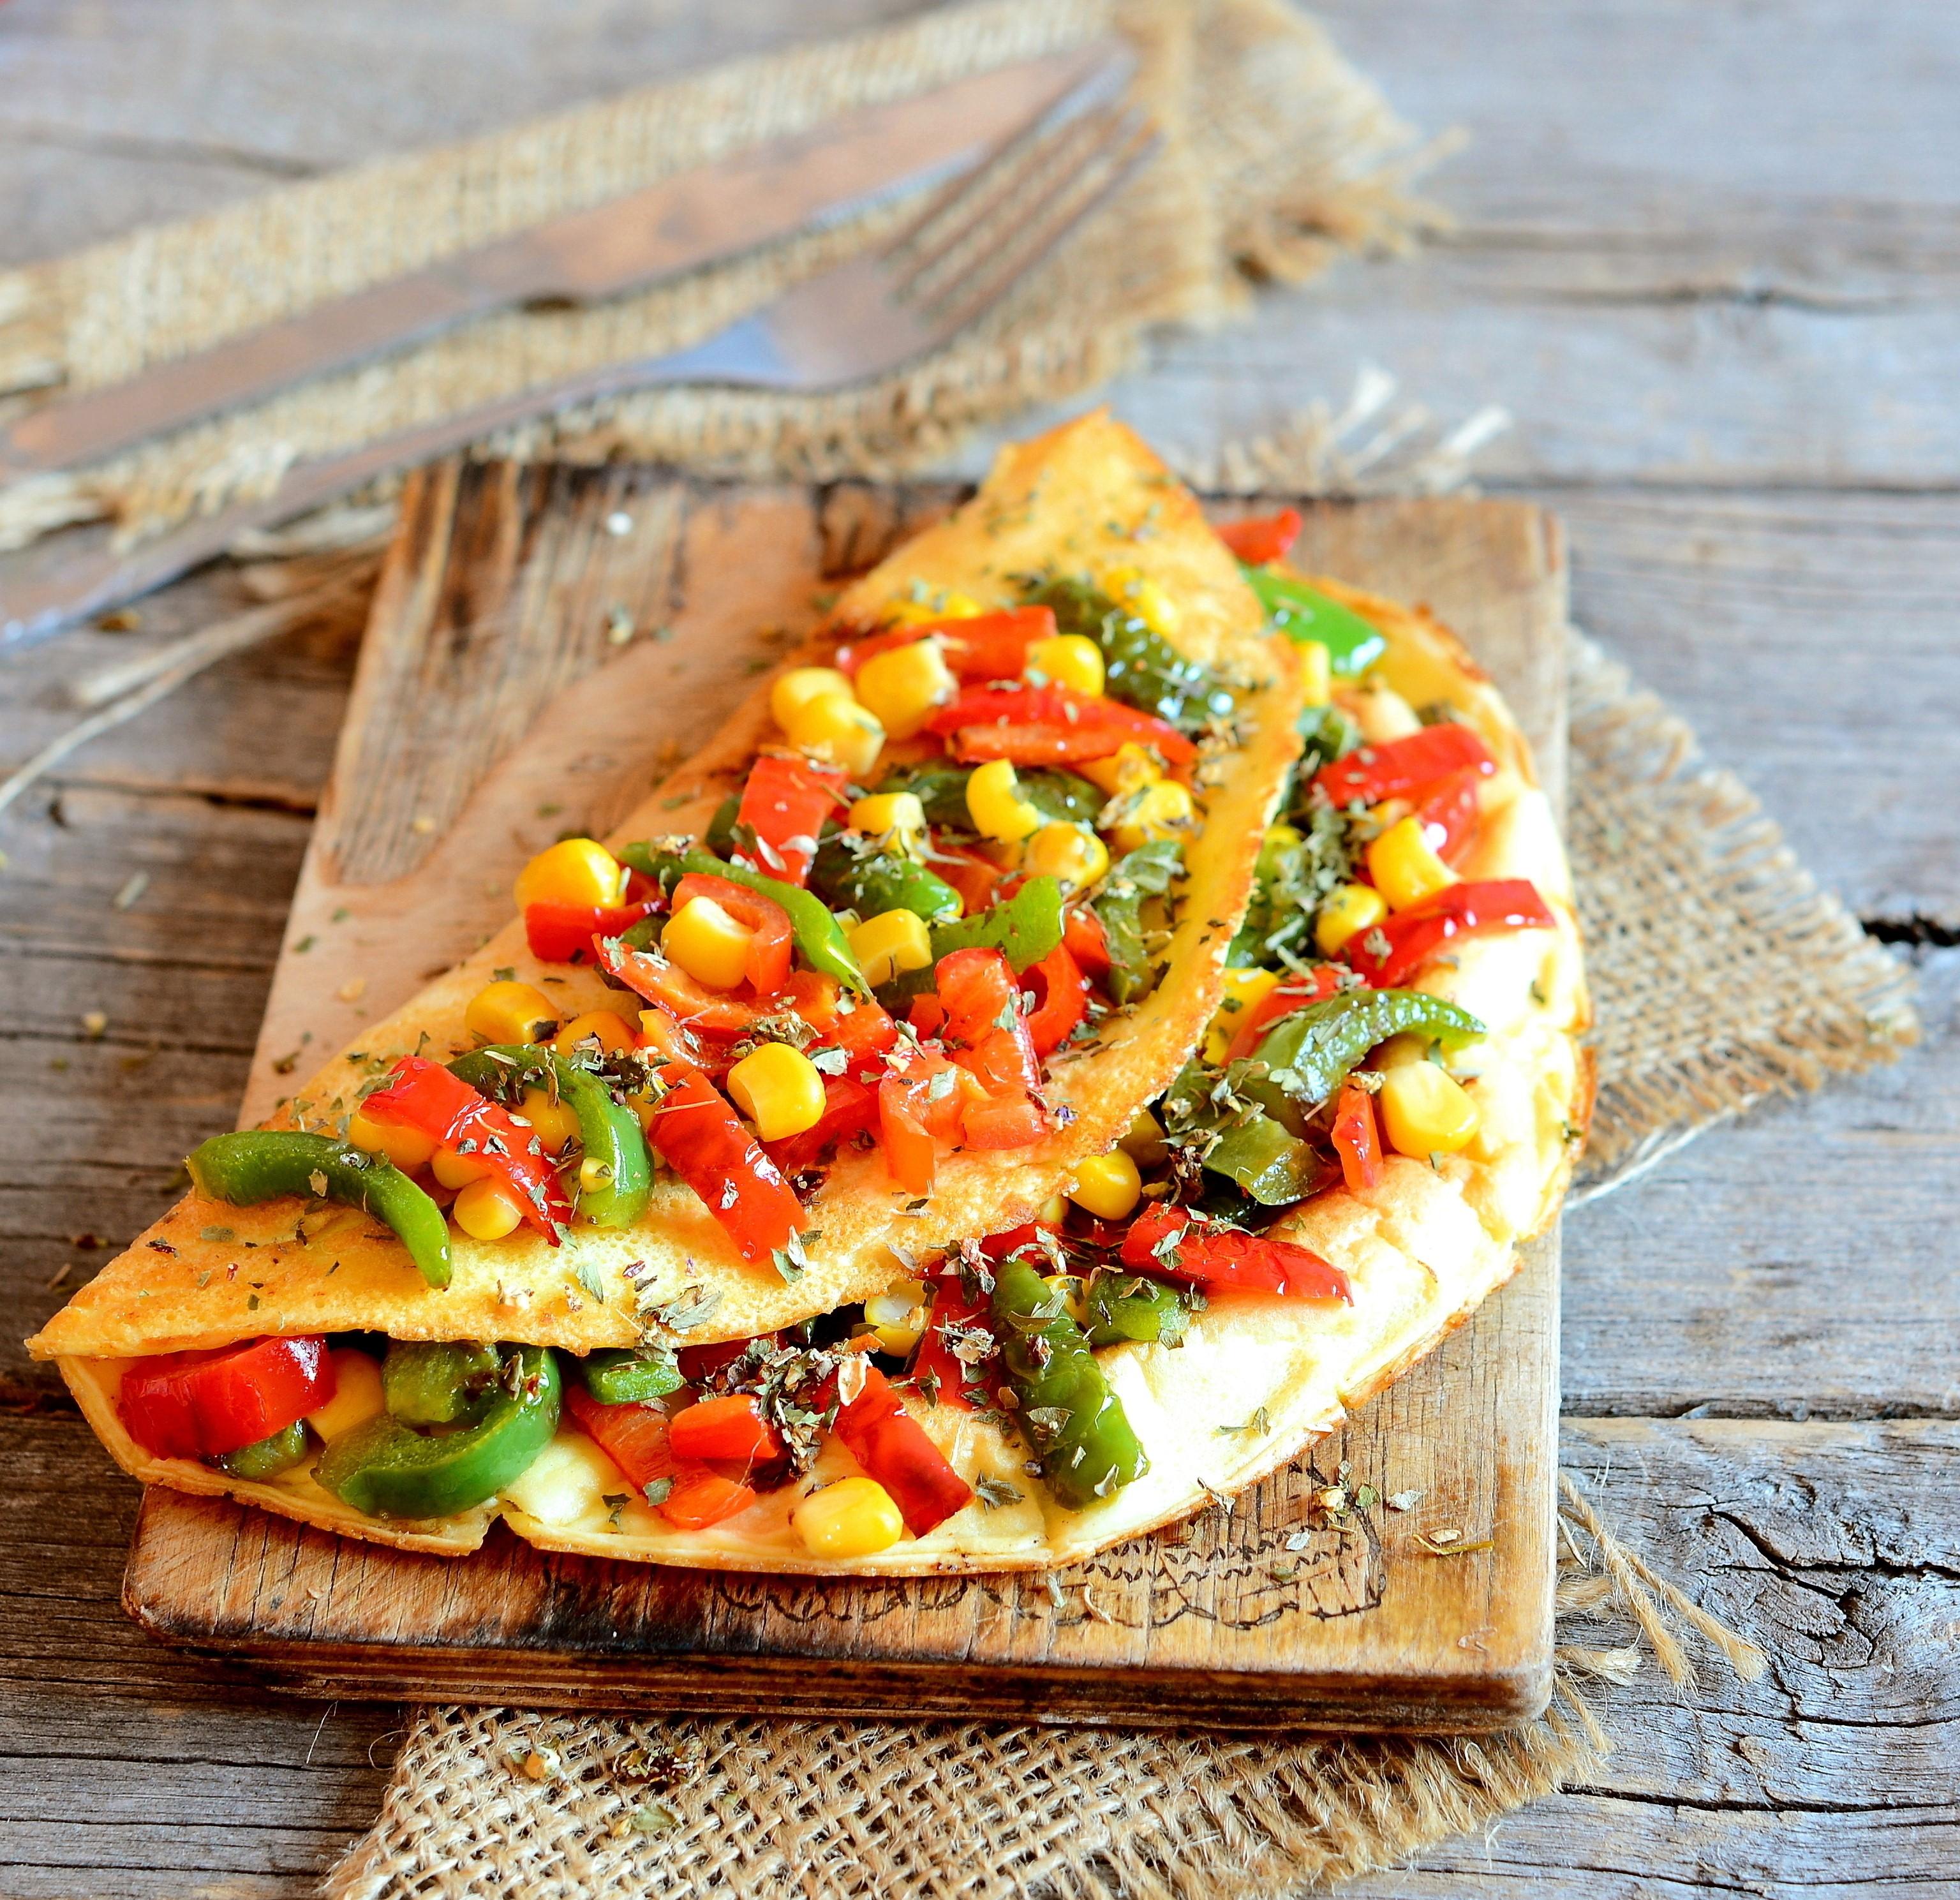 Omelet topped with canned vegetables on a wooden background.